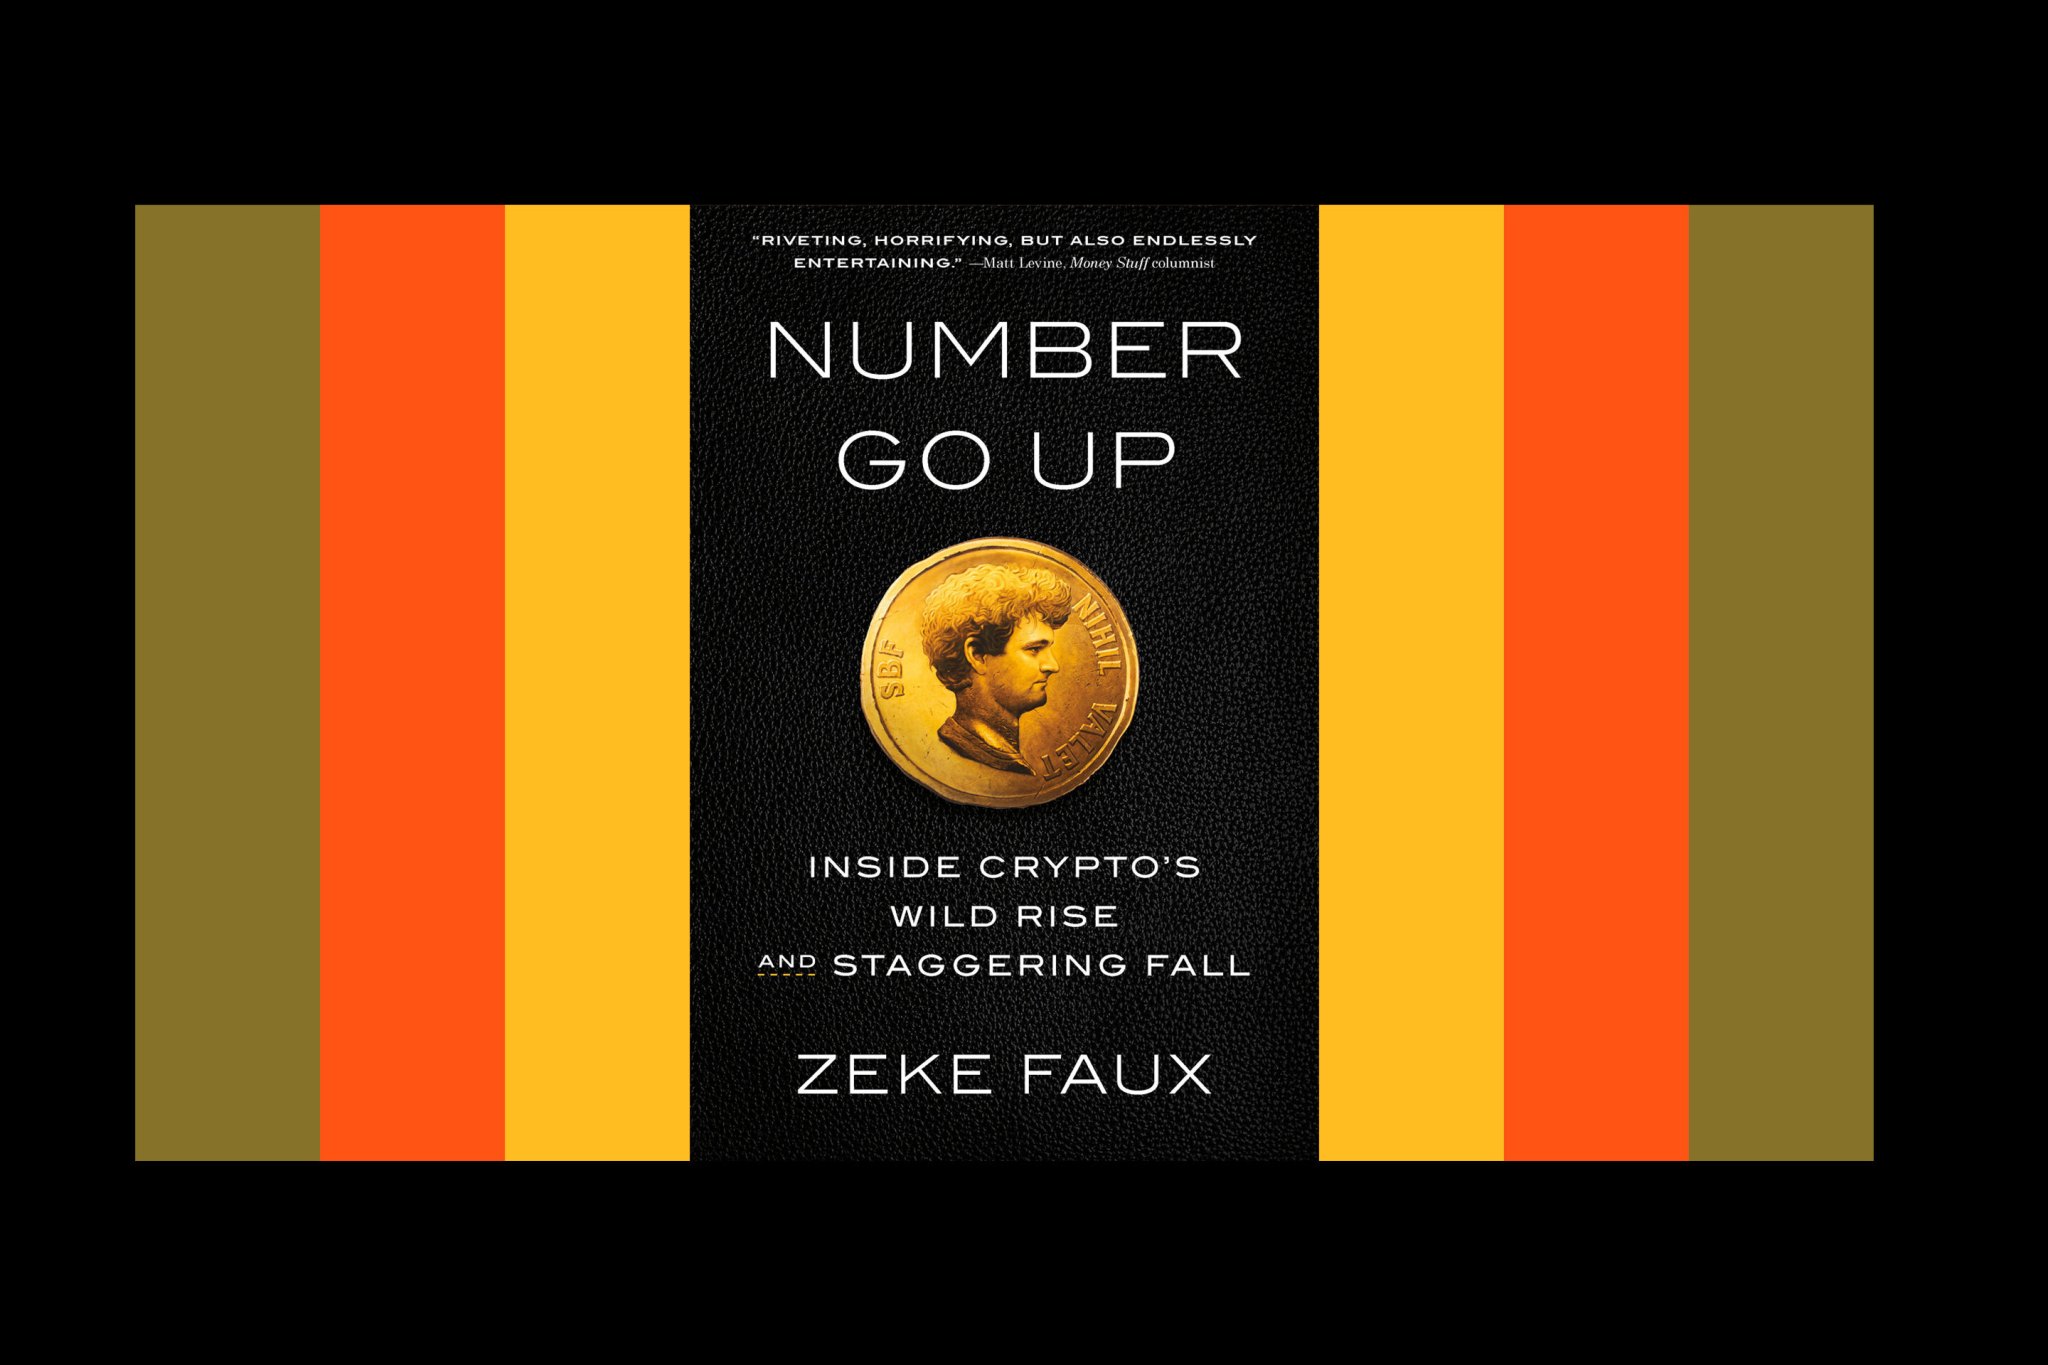 Review: ‘Number Go Up’ is a funny if shallow look at the worst people in crypto